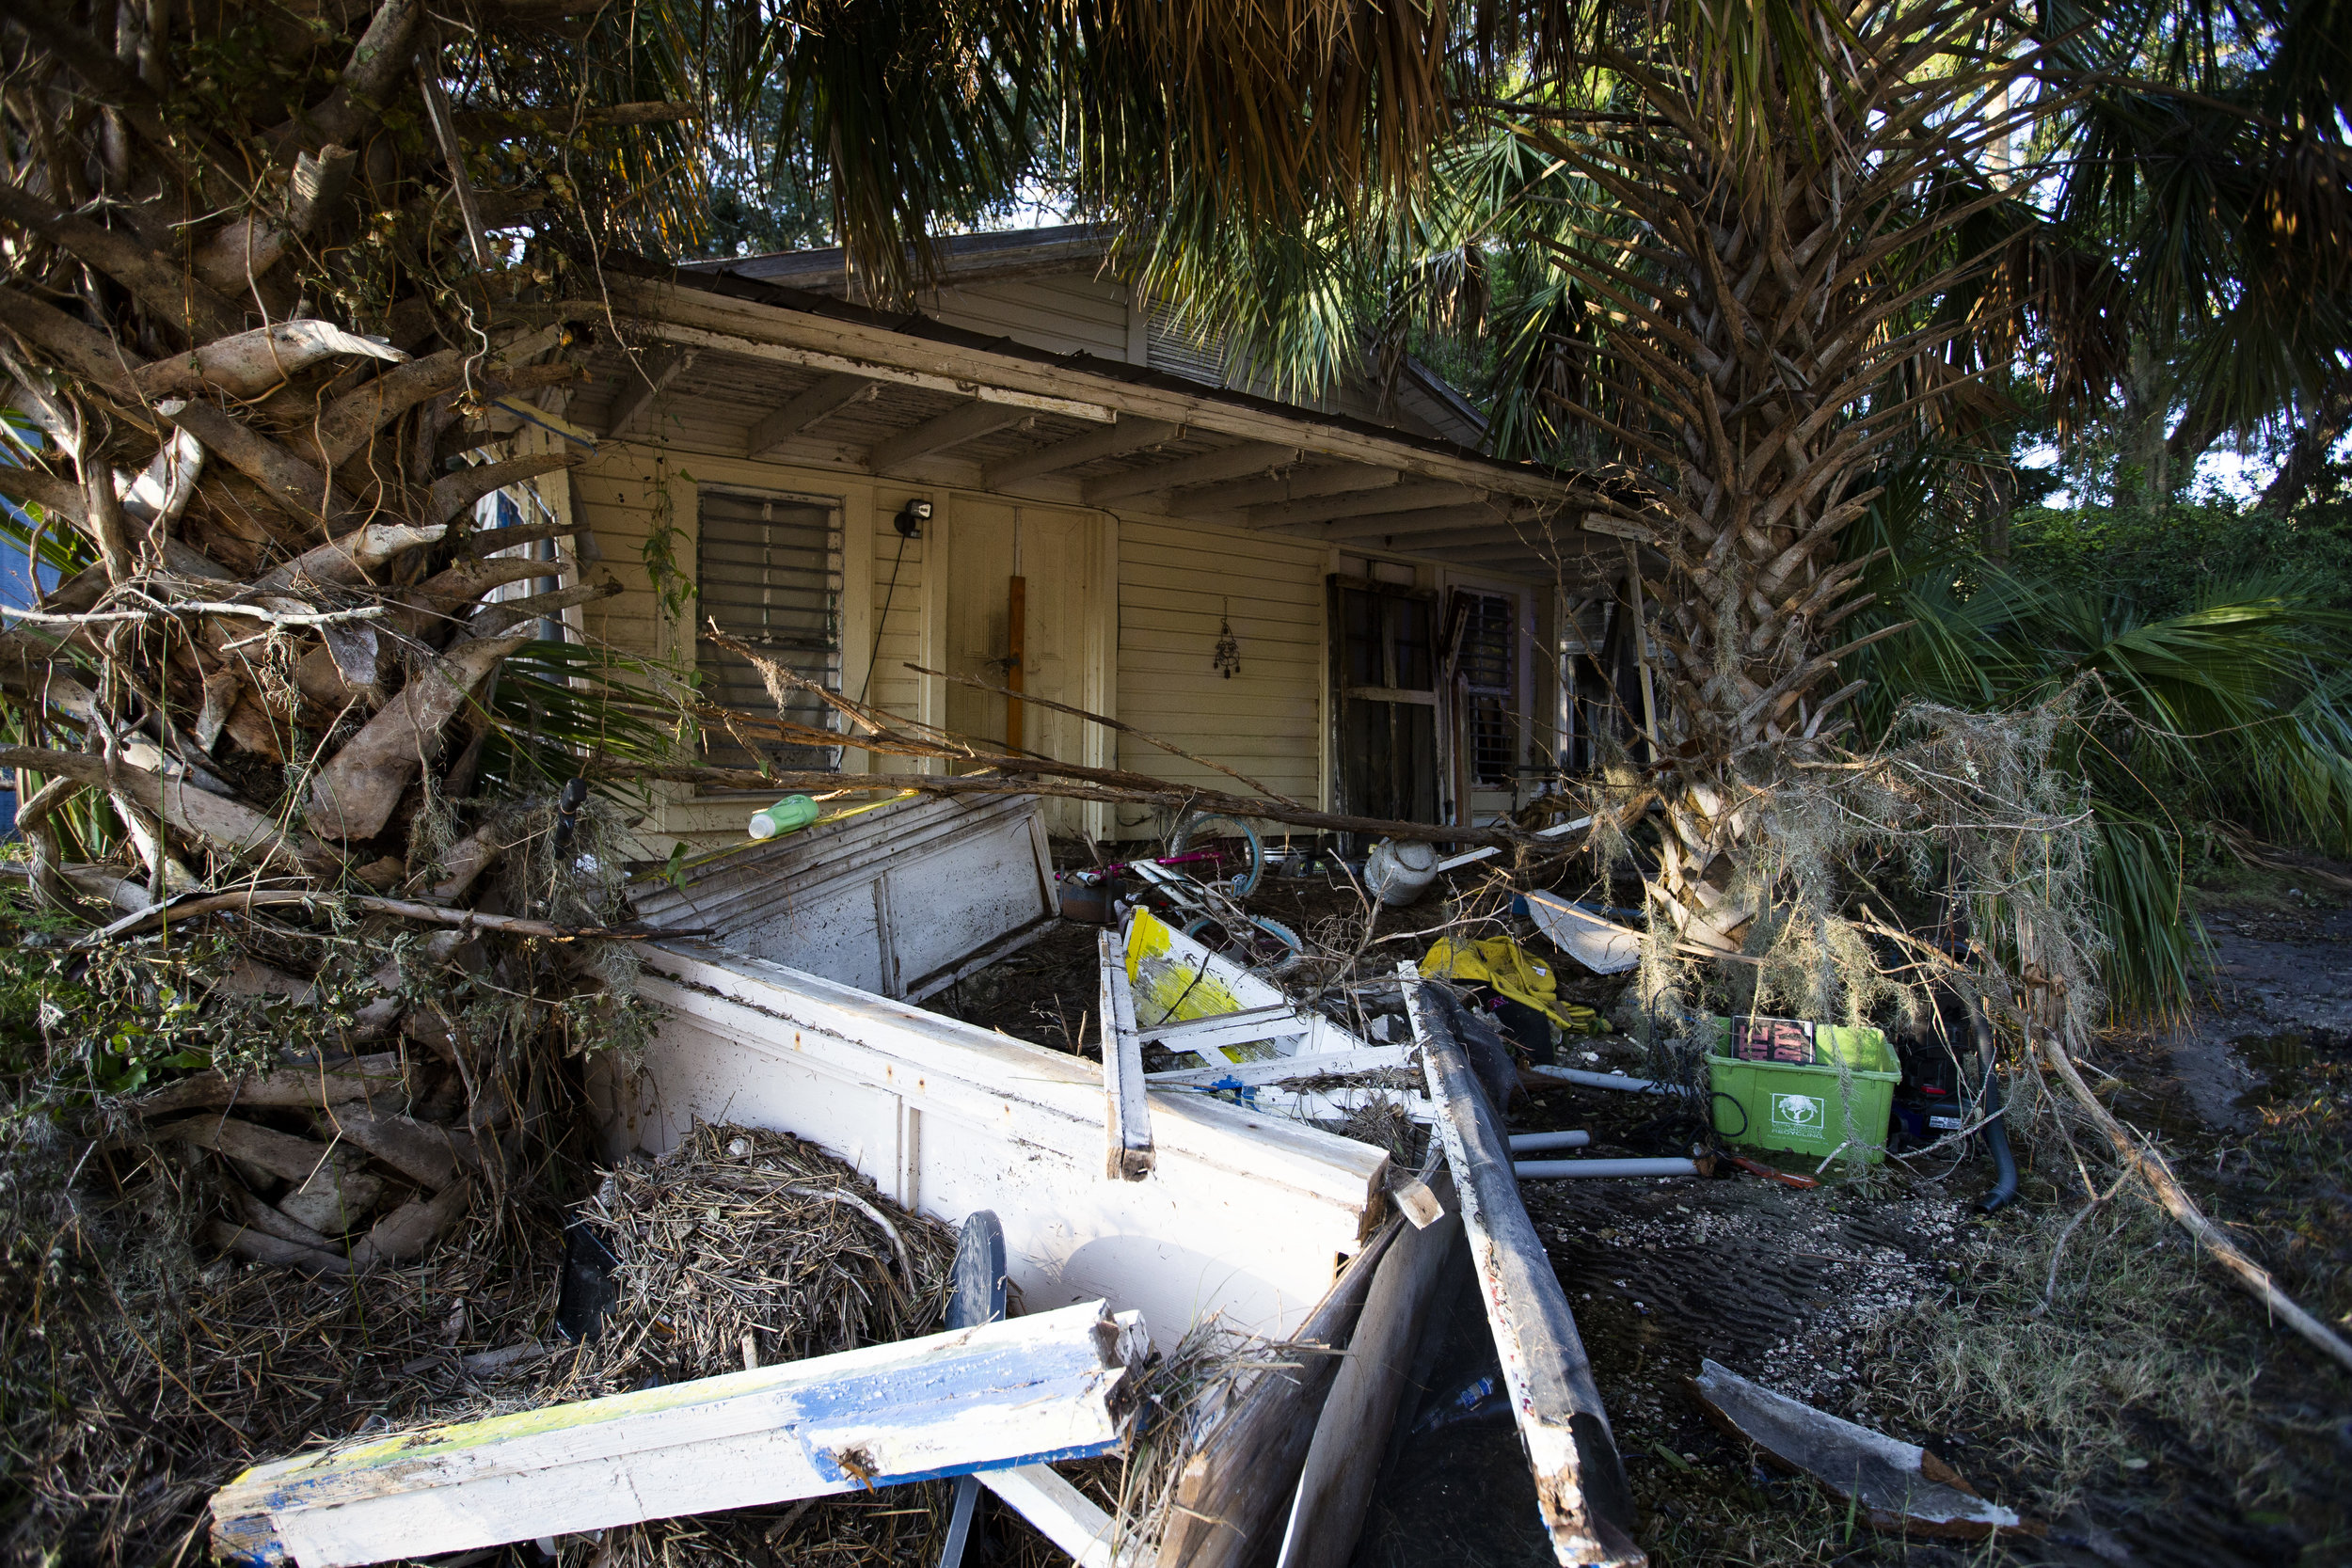  A house sits among debris after Hurricane Michael stormed the area In Spring Creek on October 10, 2018. 